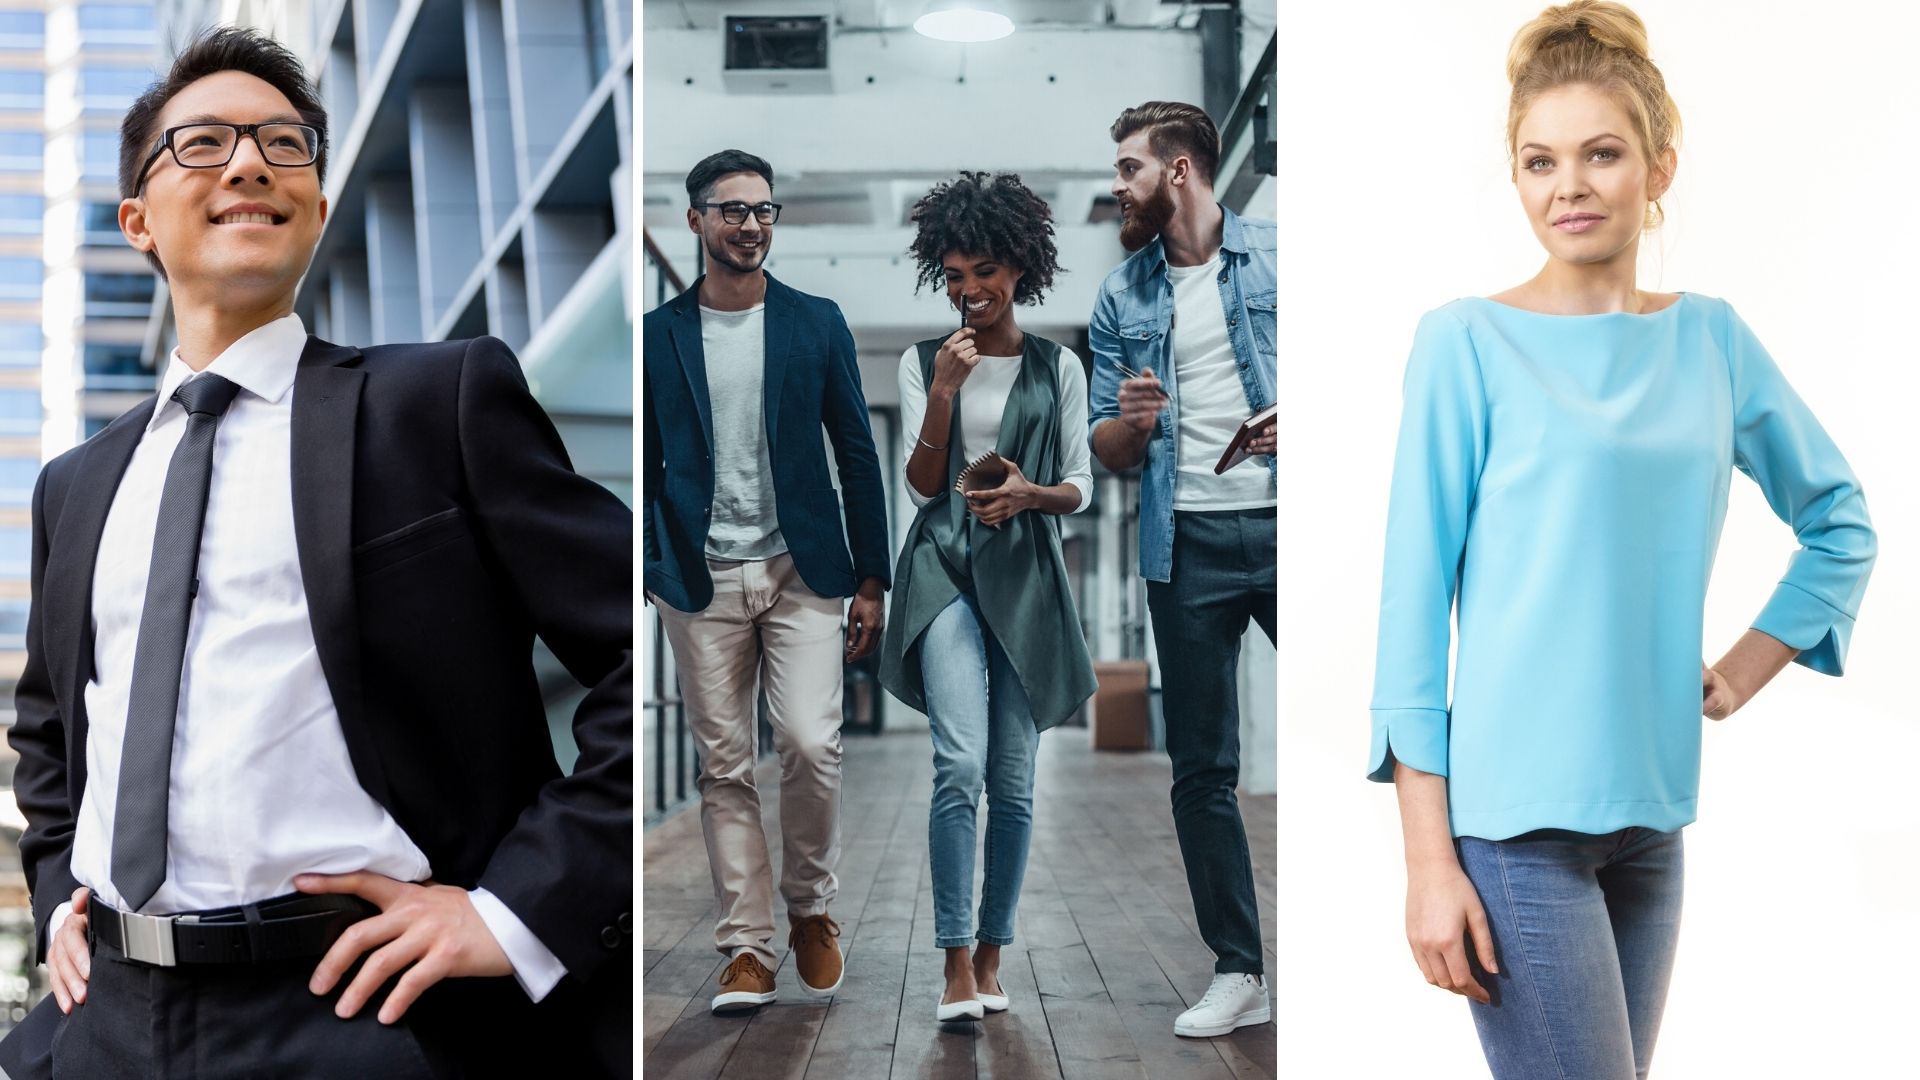 Interview Outfit Examples